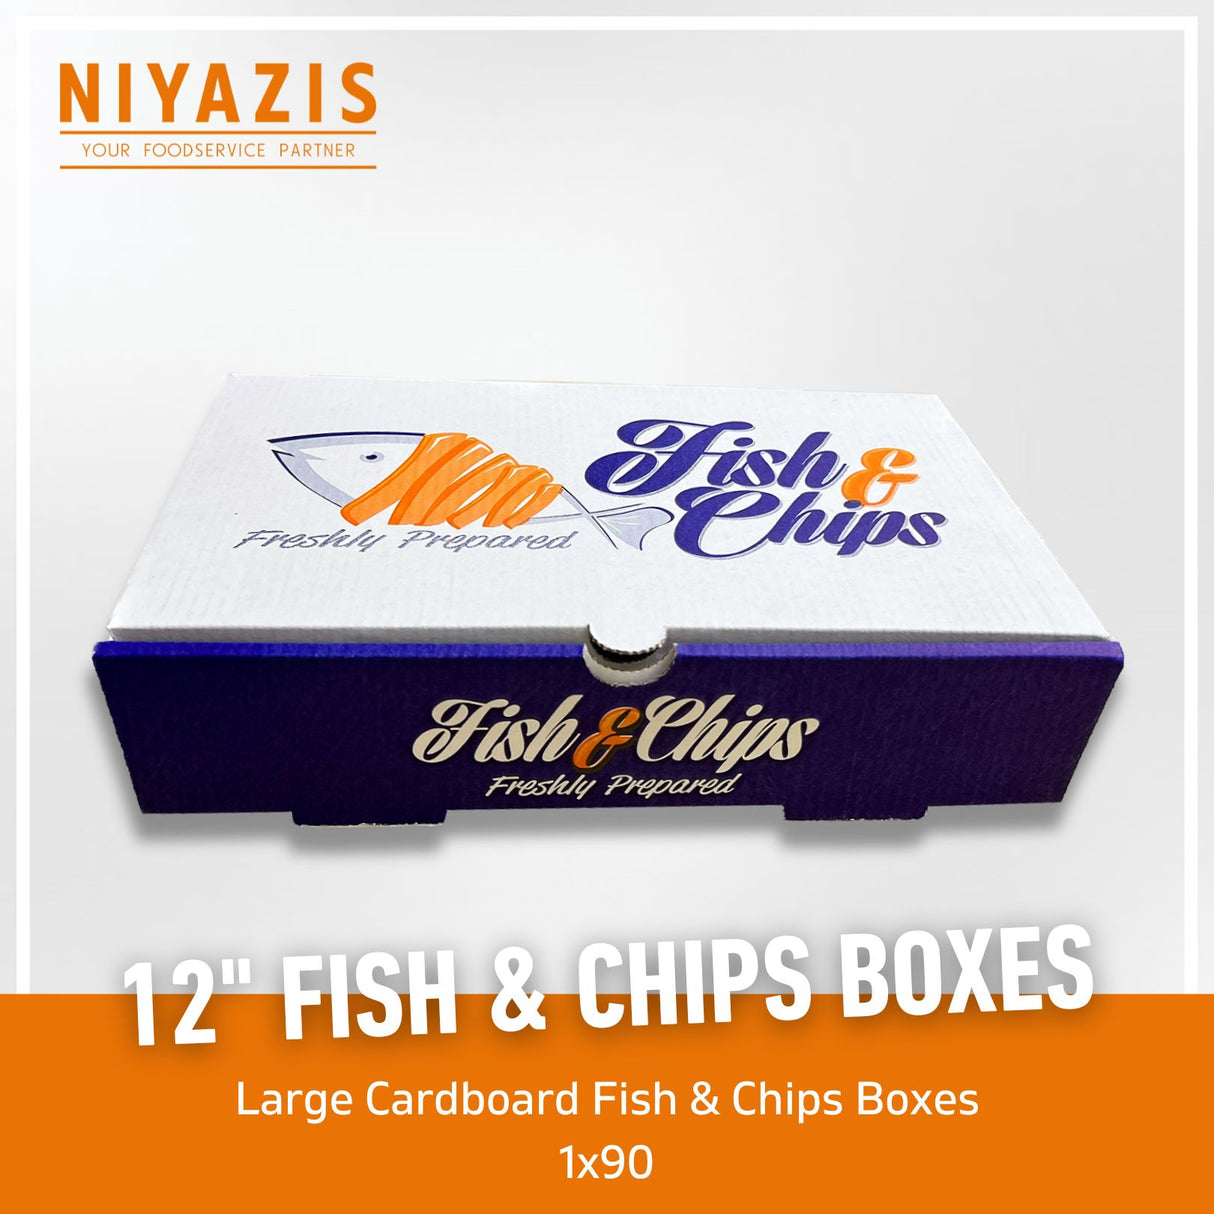 12" Cardboard Fish & Chips Boxes 1X90